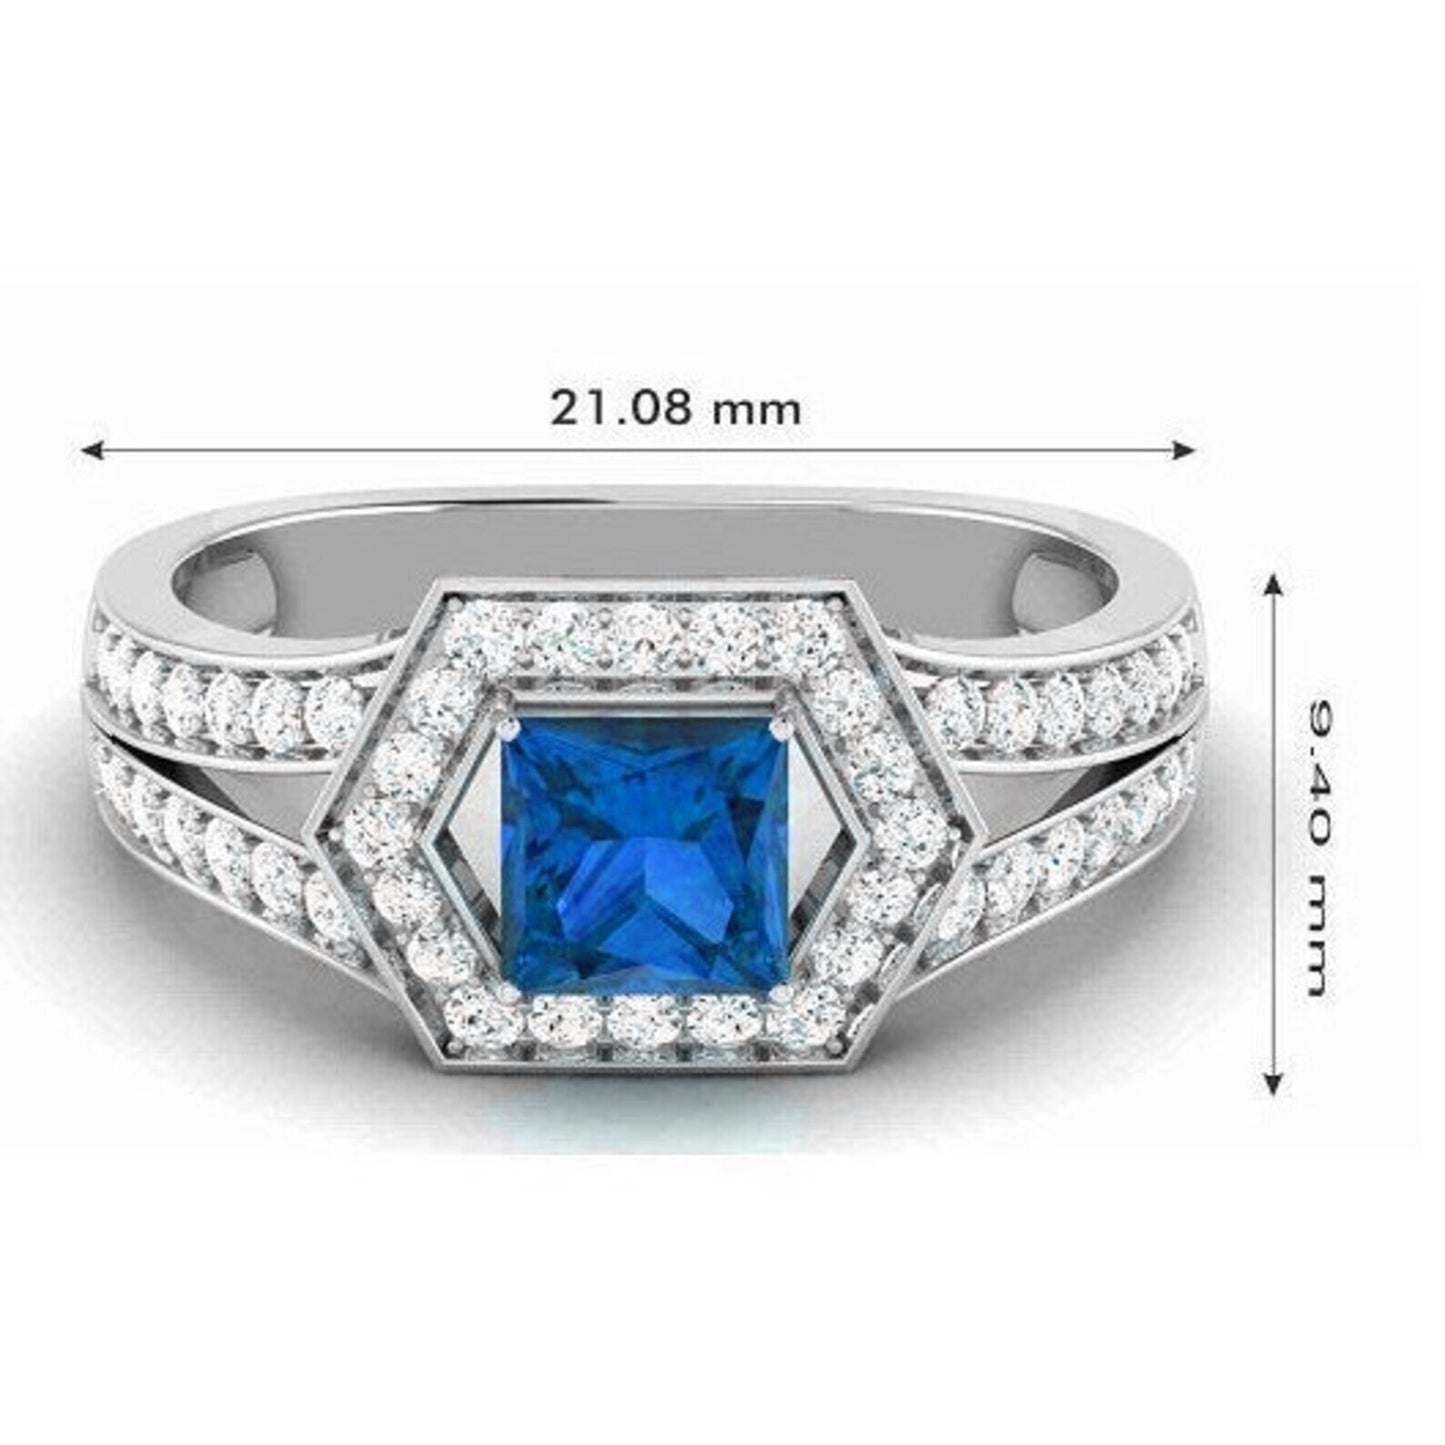 PRINCESS CUT BLUE Sapphire Ring, .925 Sterling Silver, with Beautiful Accents, available in sizes 6, 7, 8, 9, and 10,Wedding Gifts,Gifts